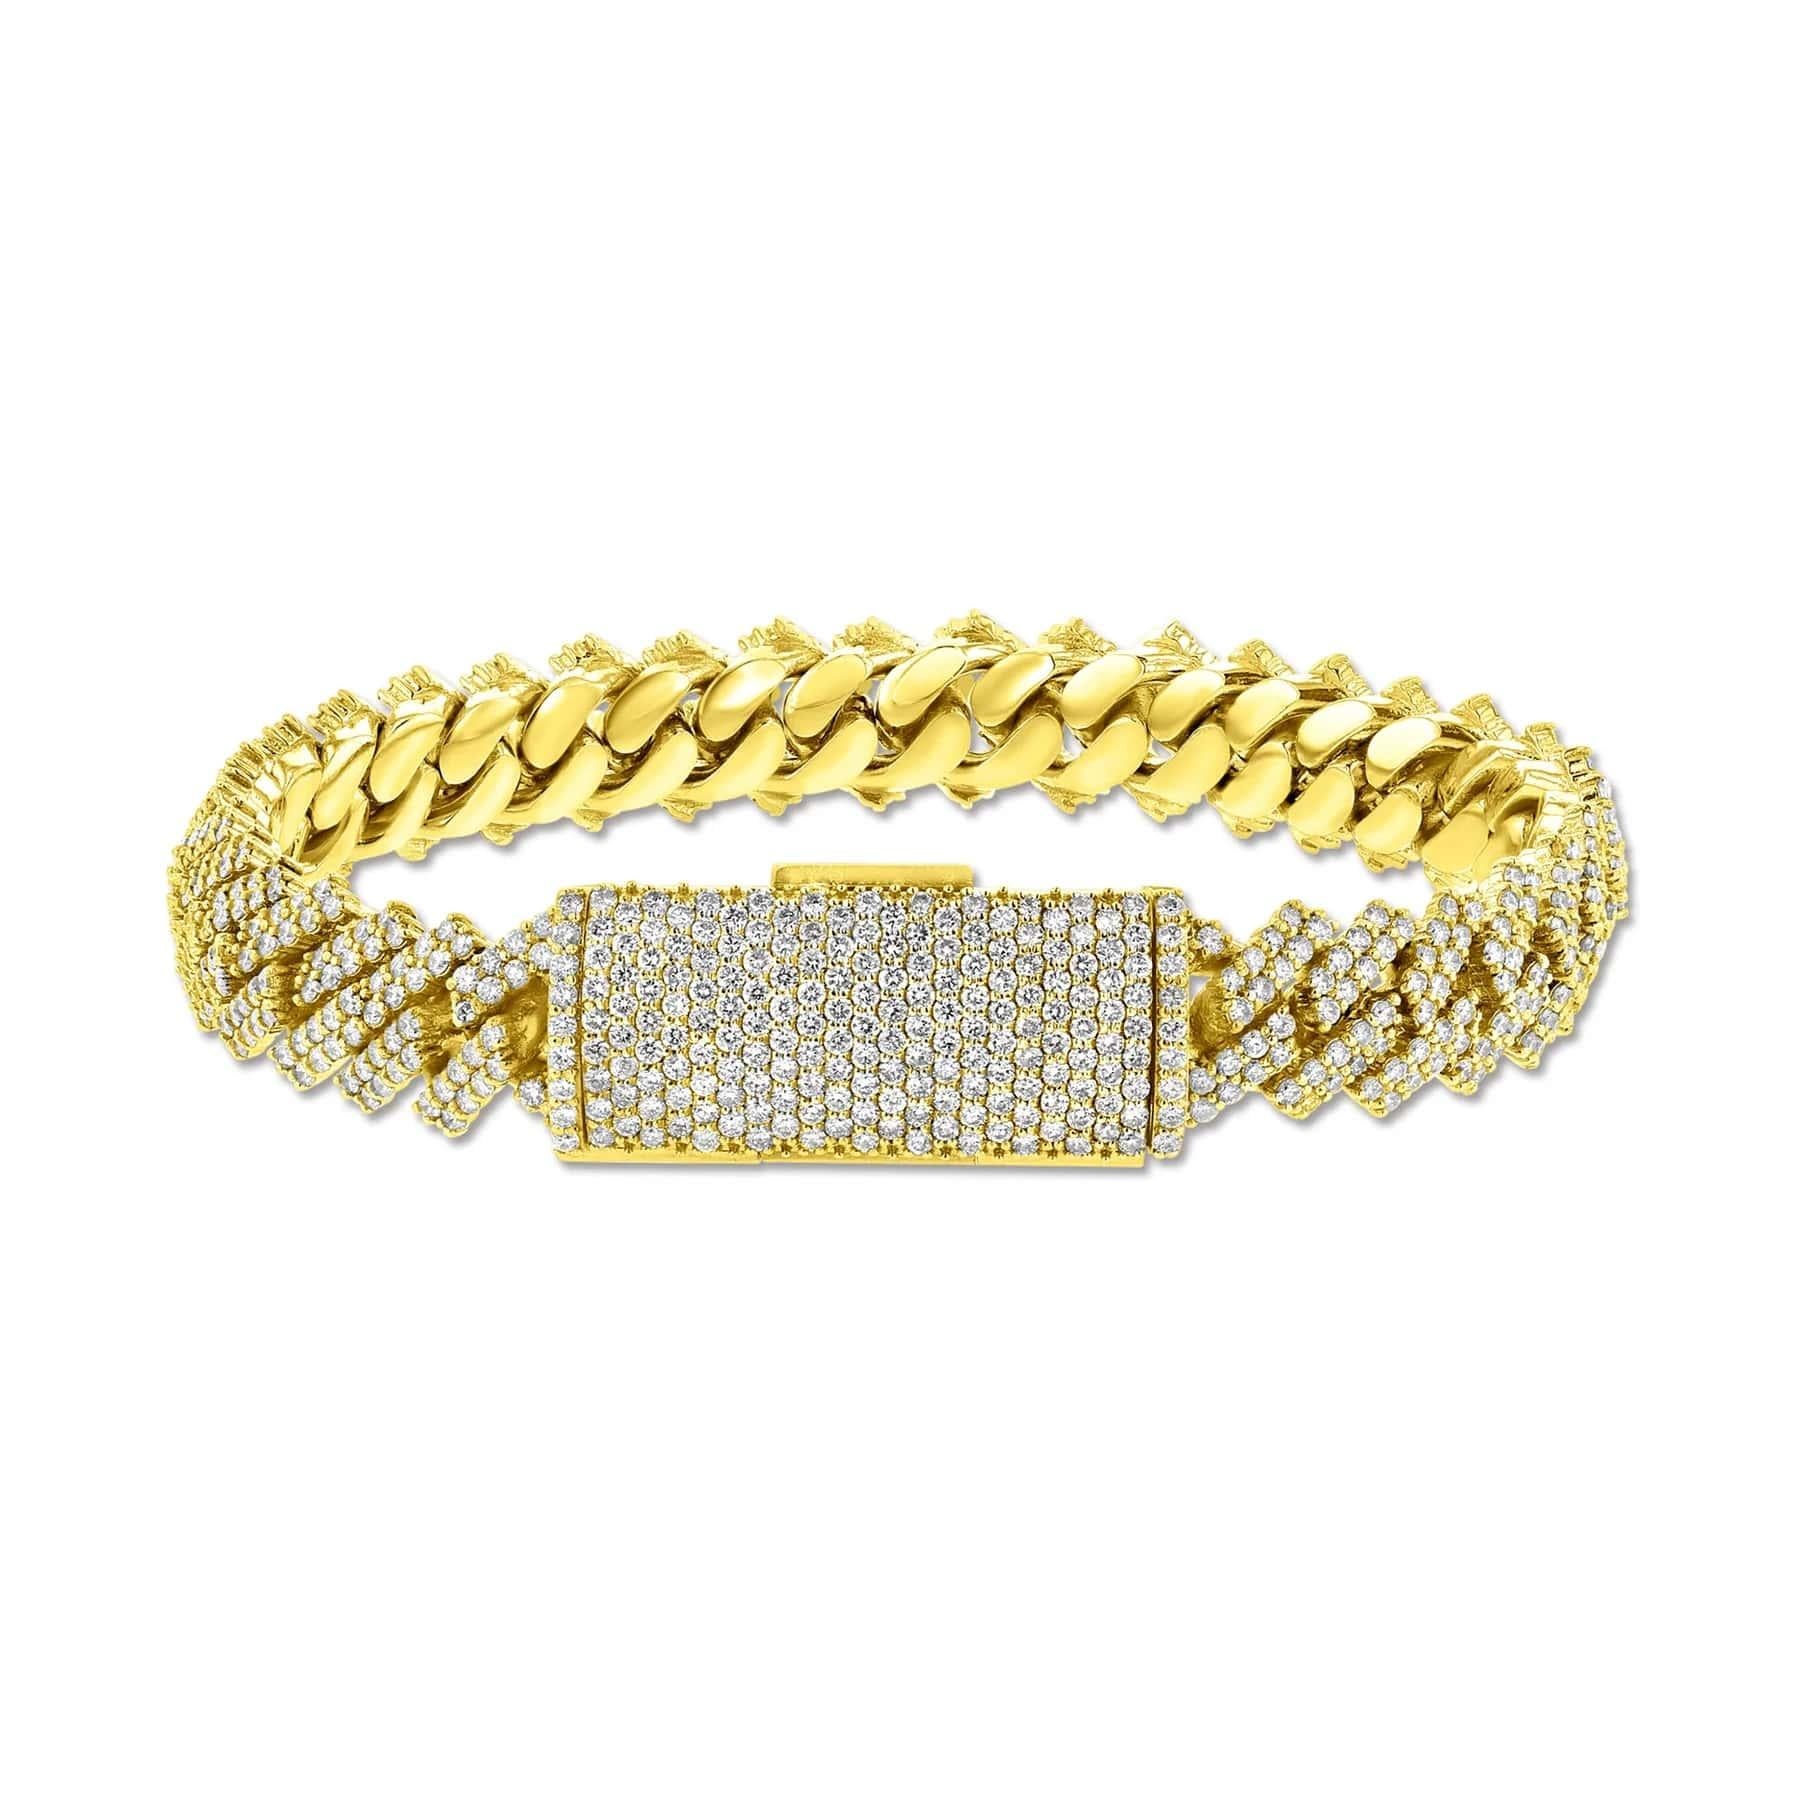 Elevate your style with the exquisite Diamond Cuban Bracelet, a versatile accessory that complements any ensemble and radiates brilliance in every setting. Crafted to perfection by minimalist artist Vera at AdornA Lux High Jewelers, this bracelet